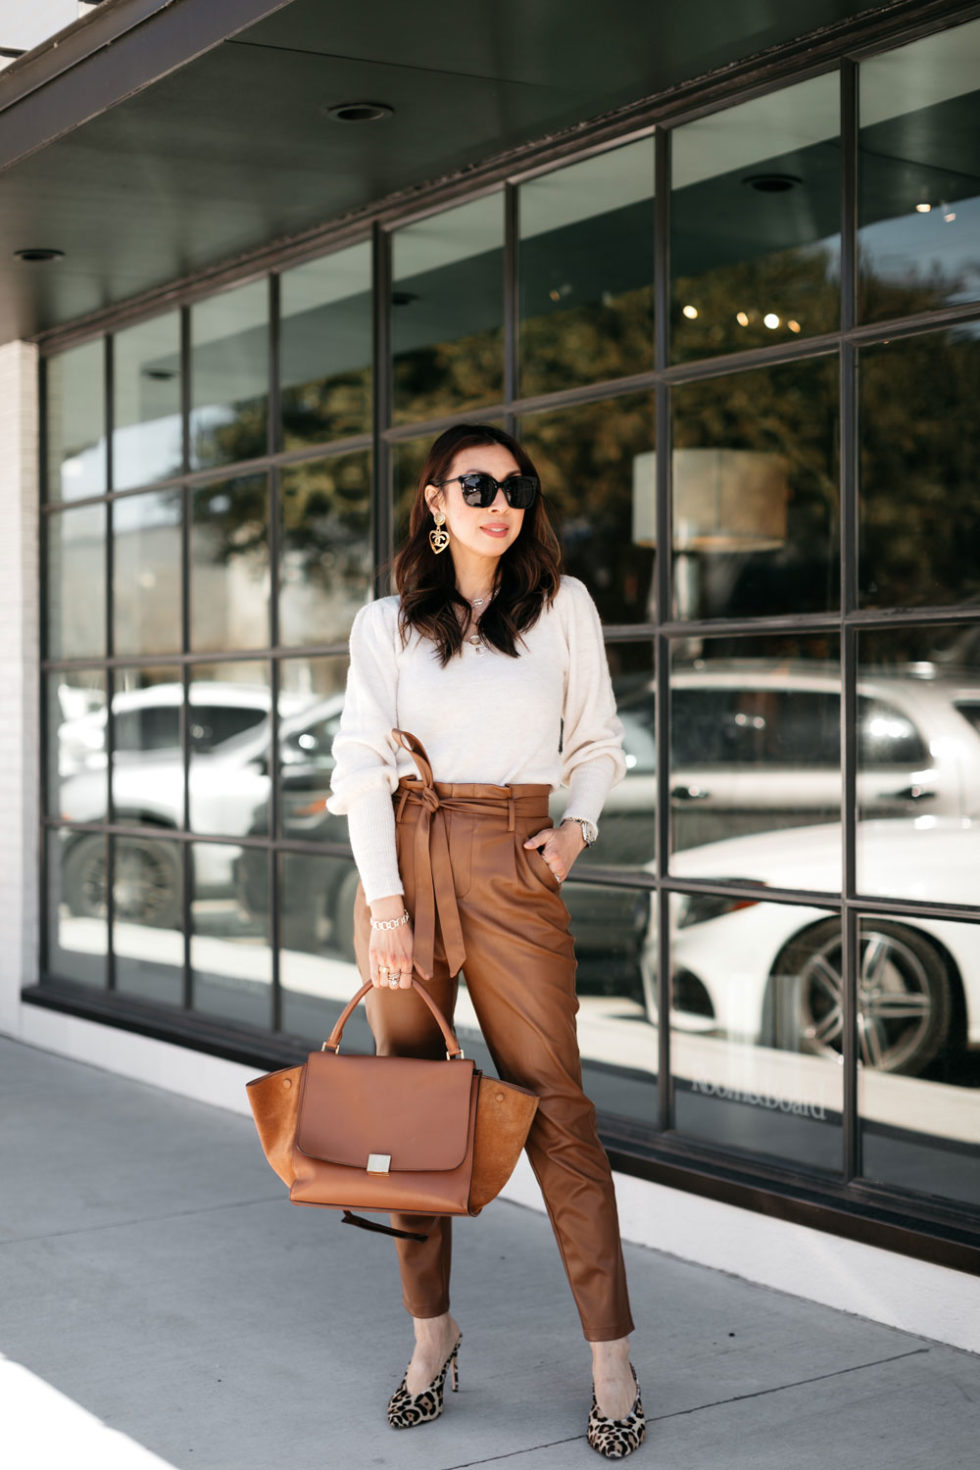 Chic at Every Age | How To Wear a Puff Sleeve Top | Style of Sam